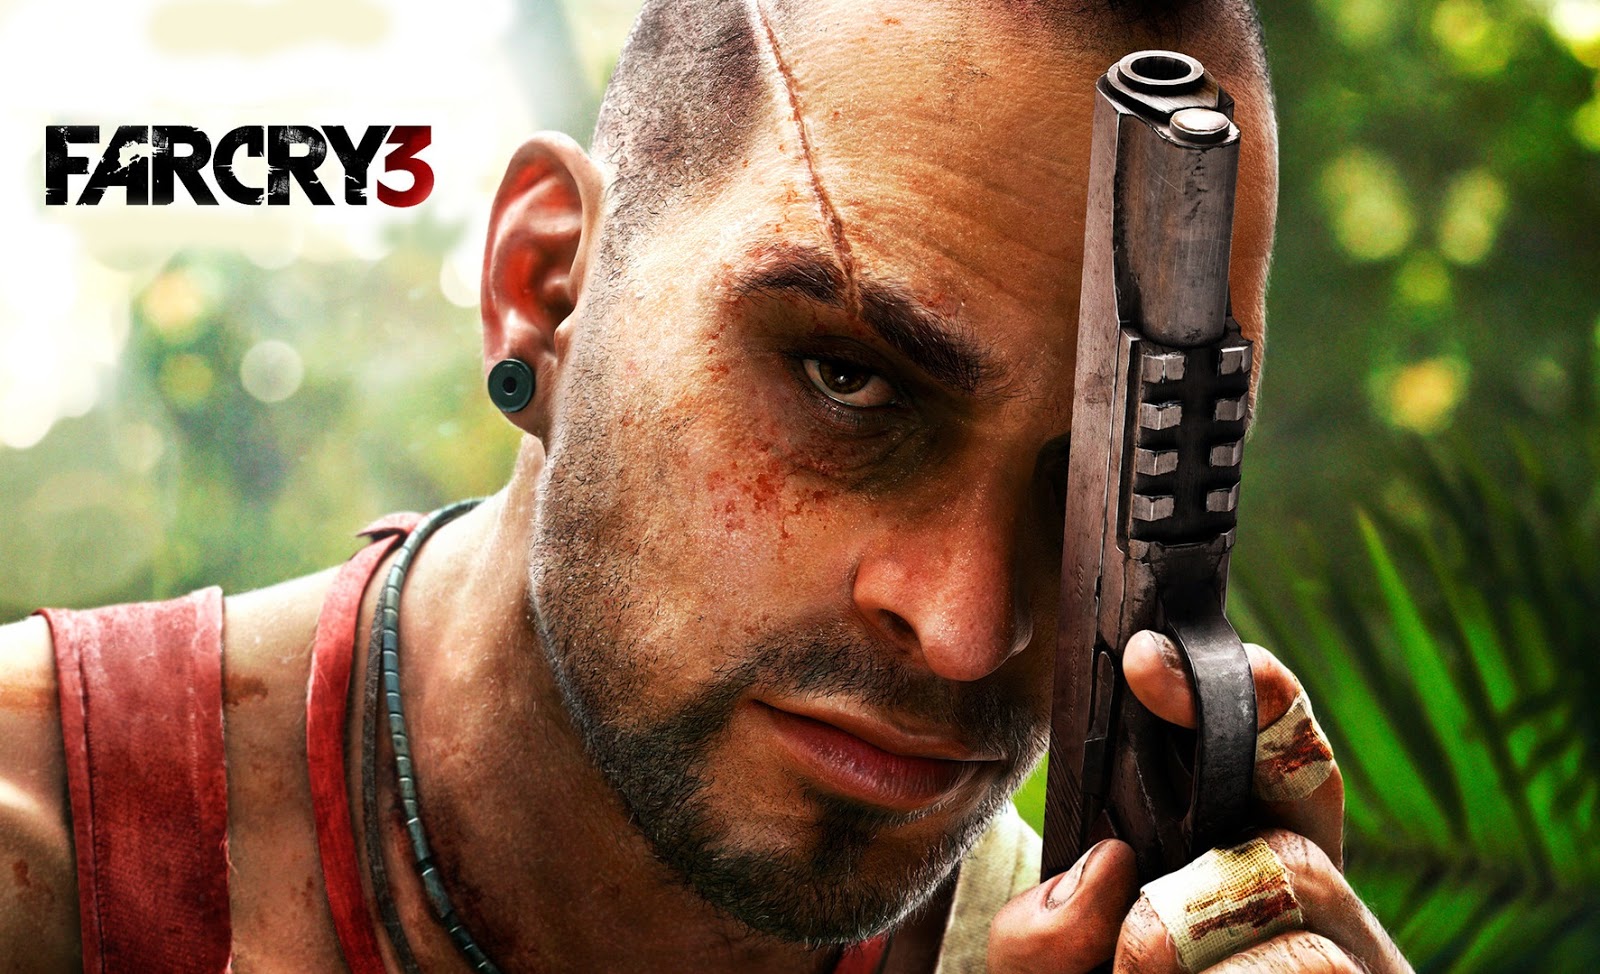 download game far cry 3 pc highly compressed